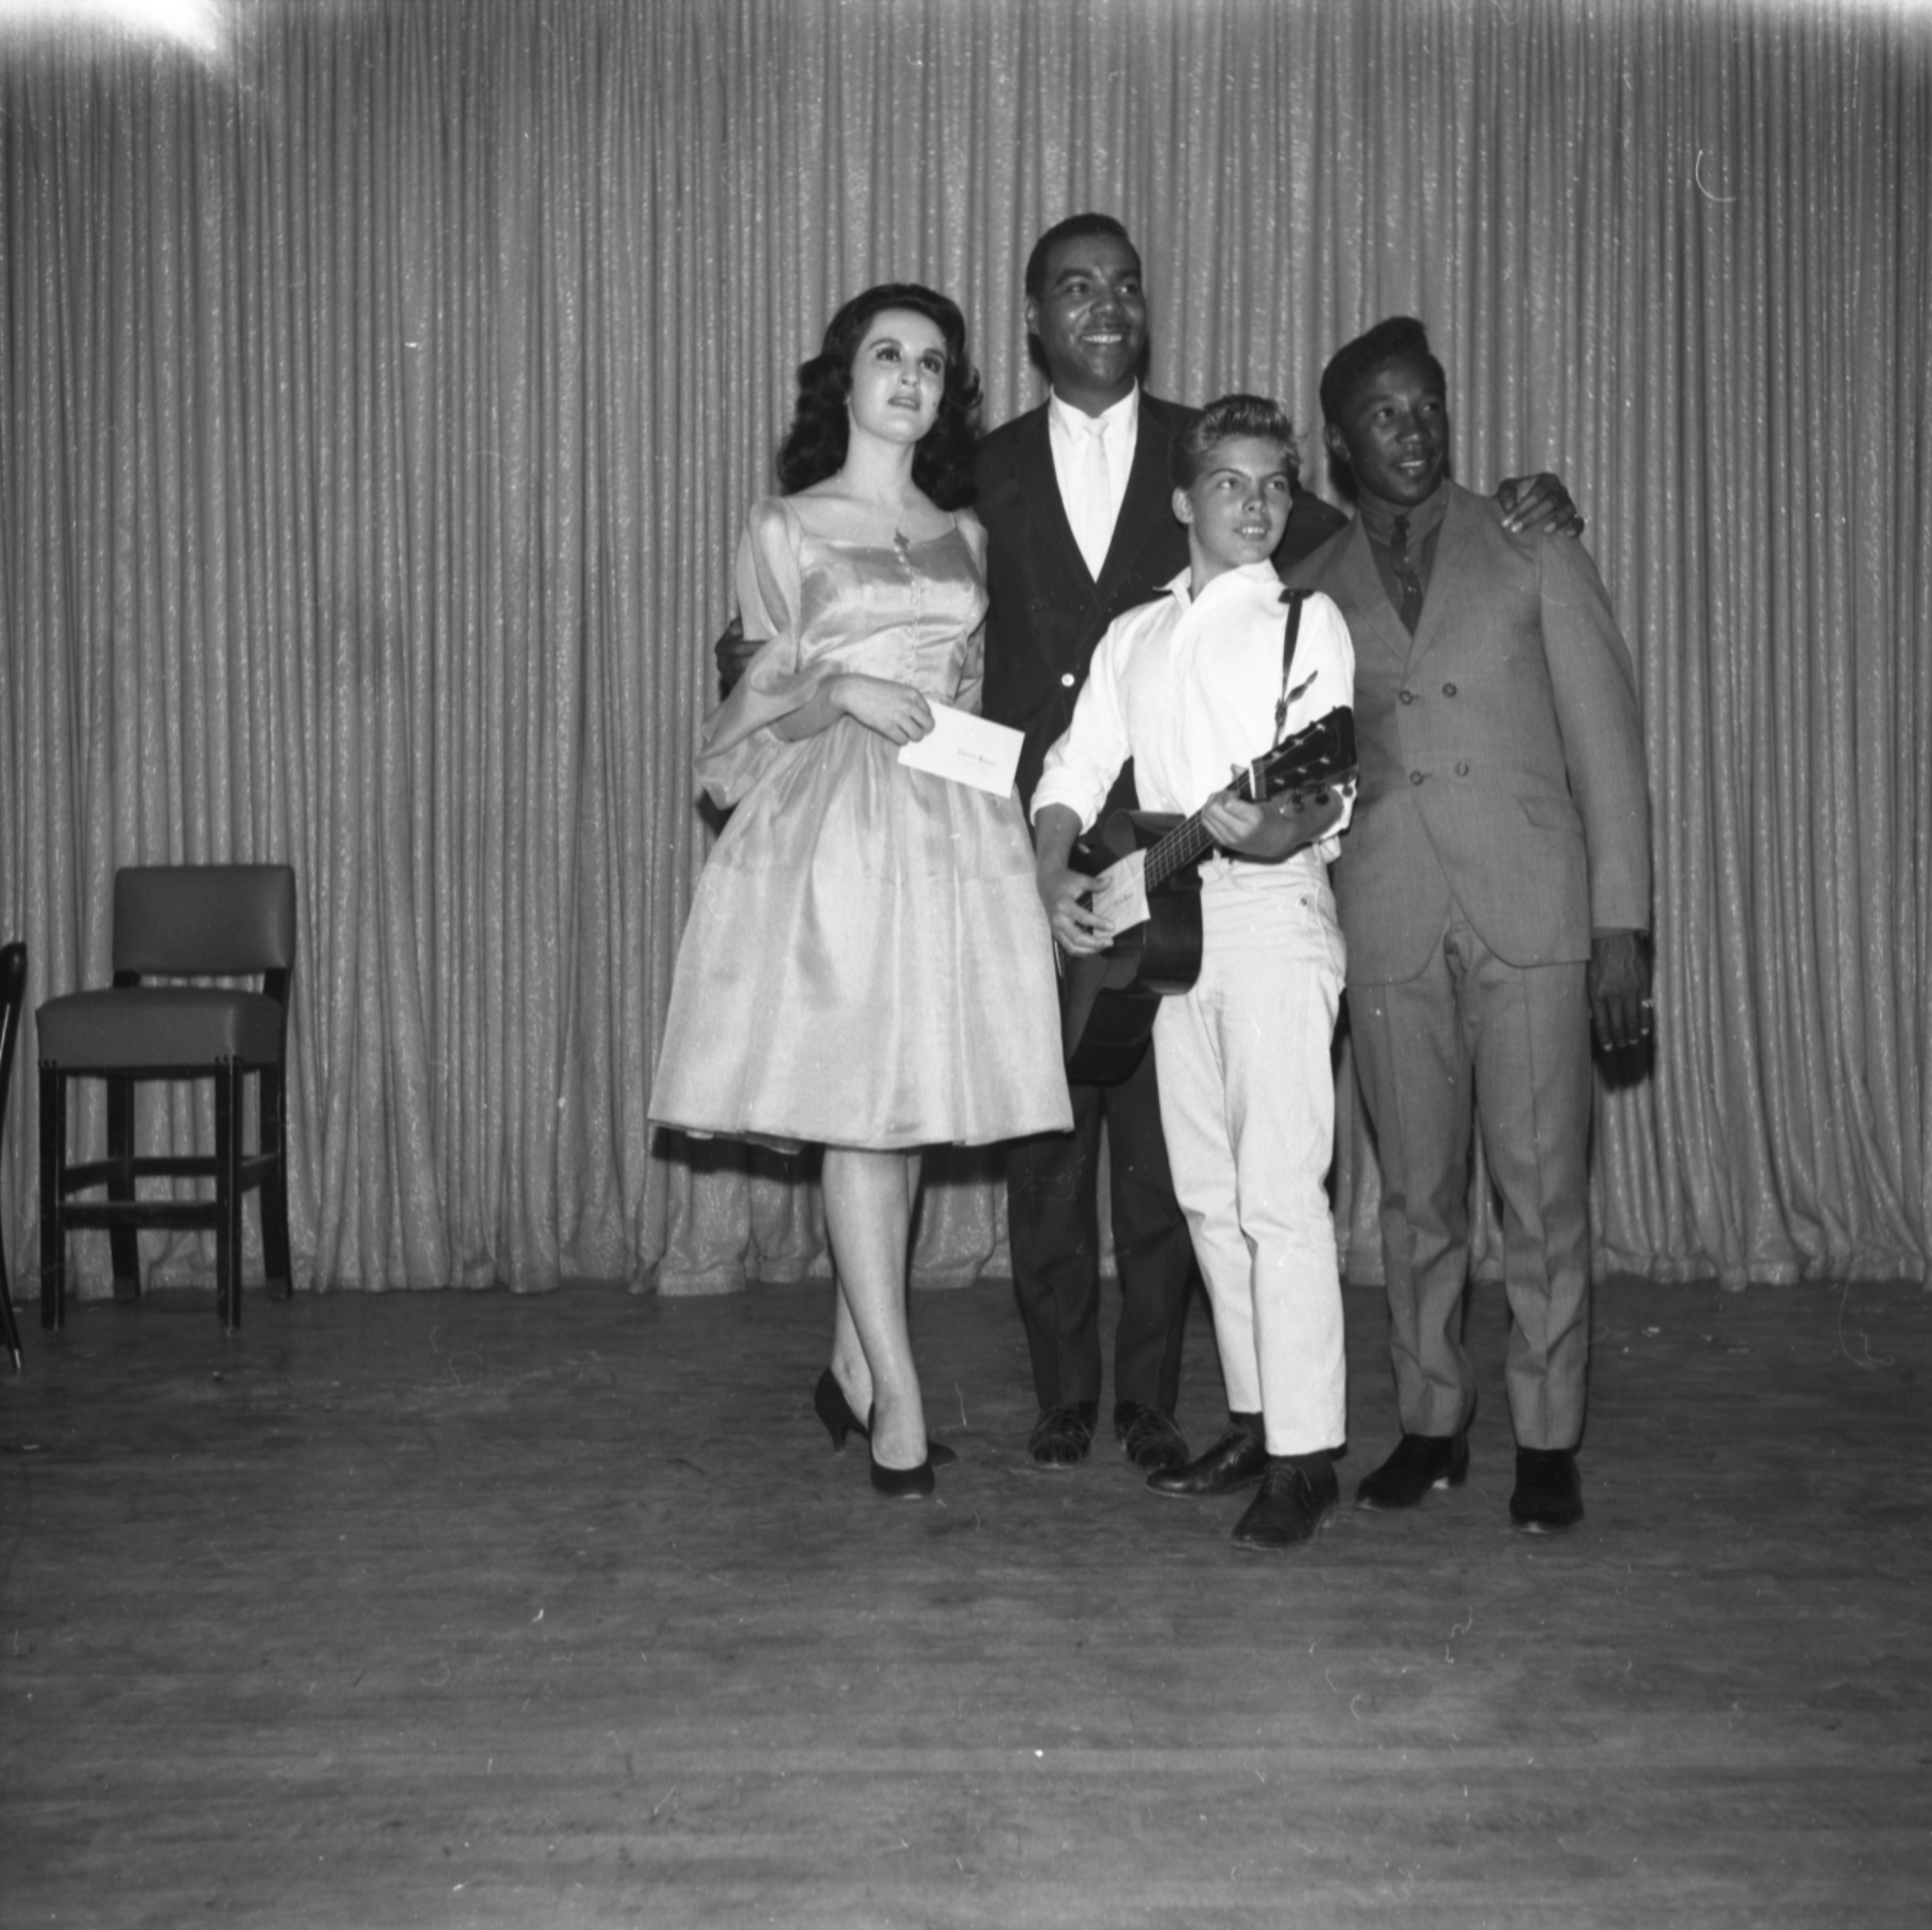 Carver House Talent Contest, May 9, 1962, Image 03